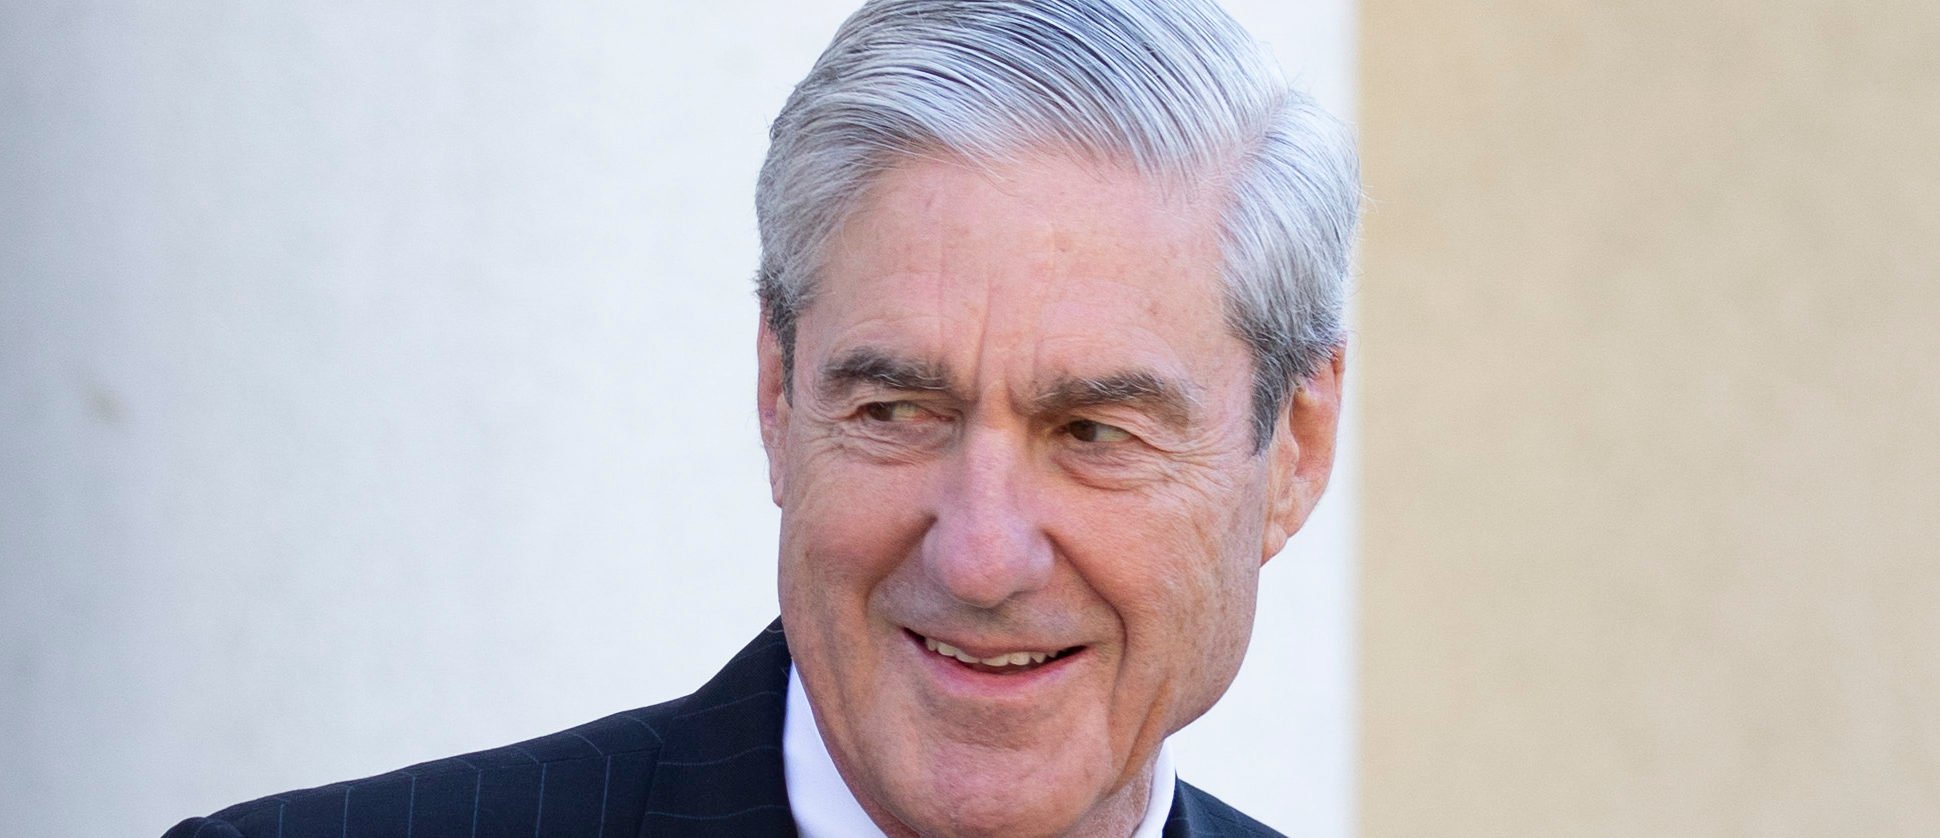 Special counsel Robert Mueller walks after attending church on March 24, 2019 in Washington, D.C. (Photo by Tasos Katopodis/Getty Images)